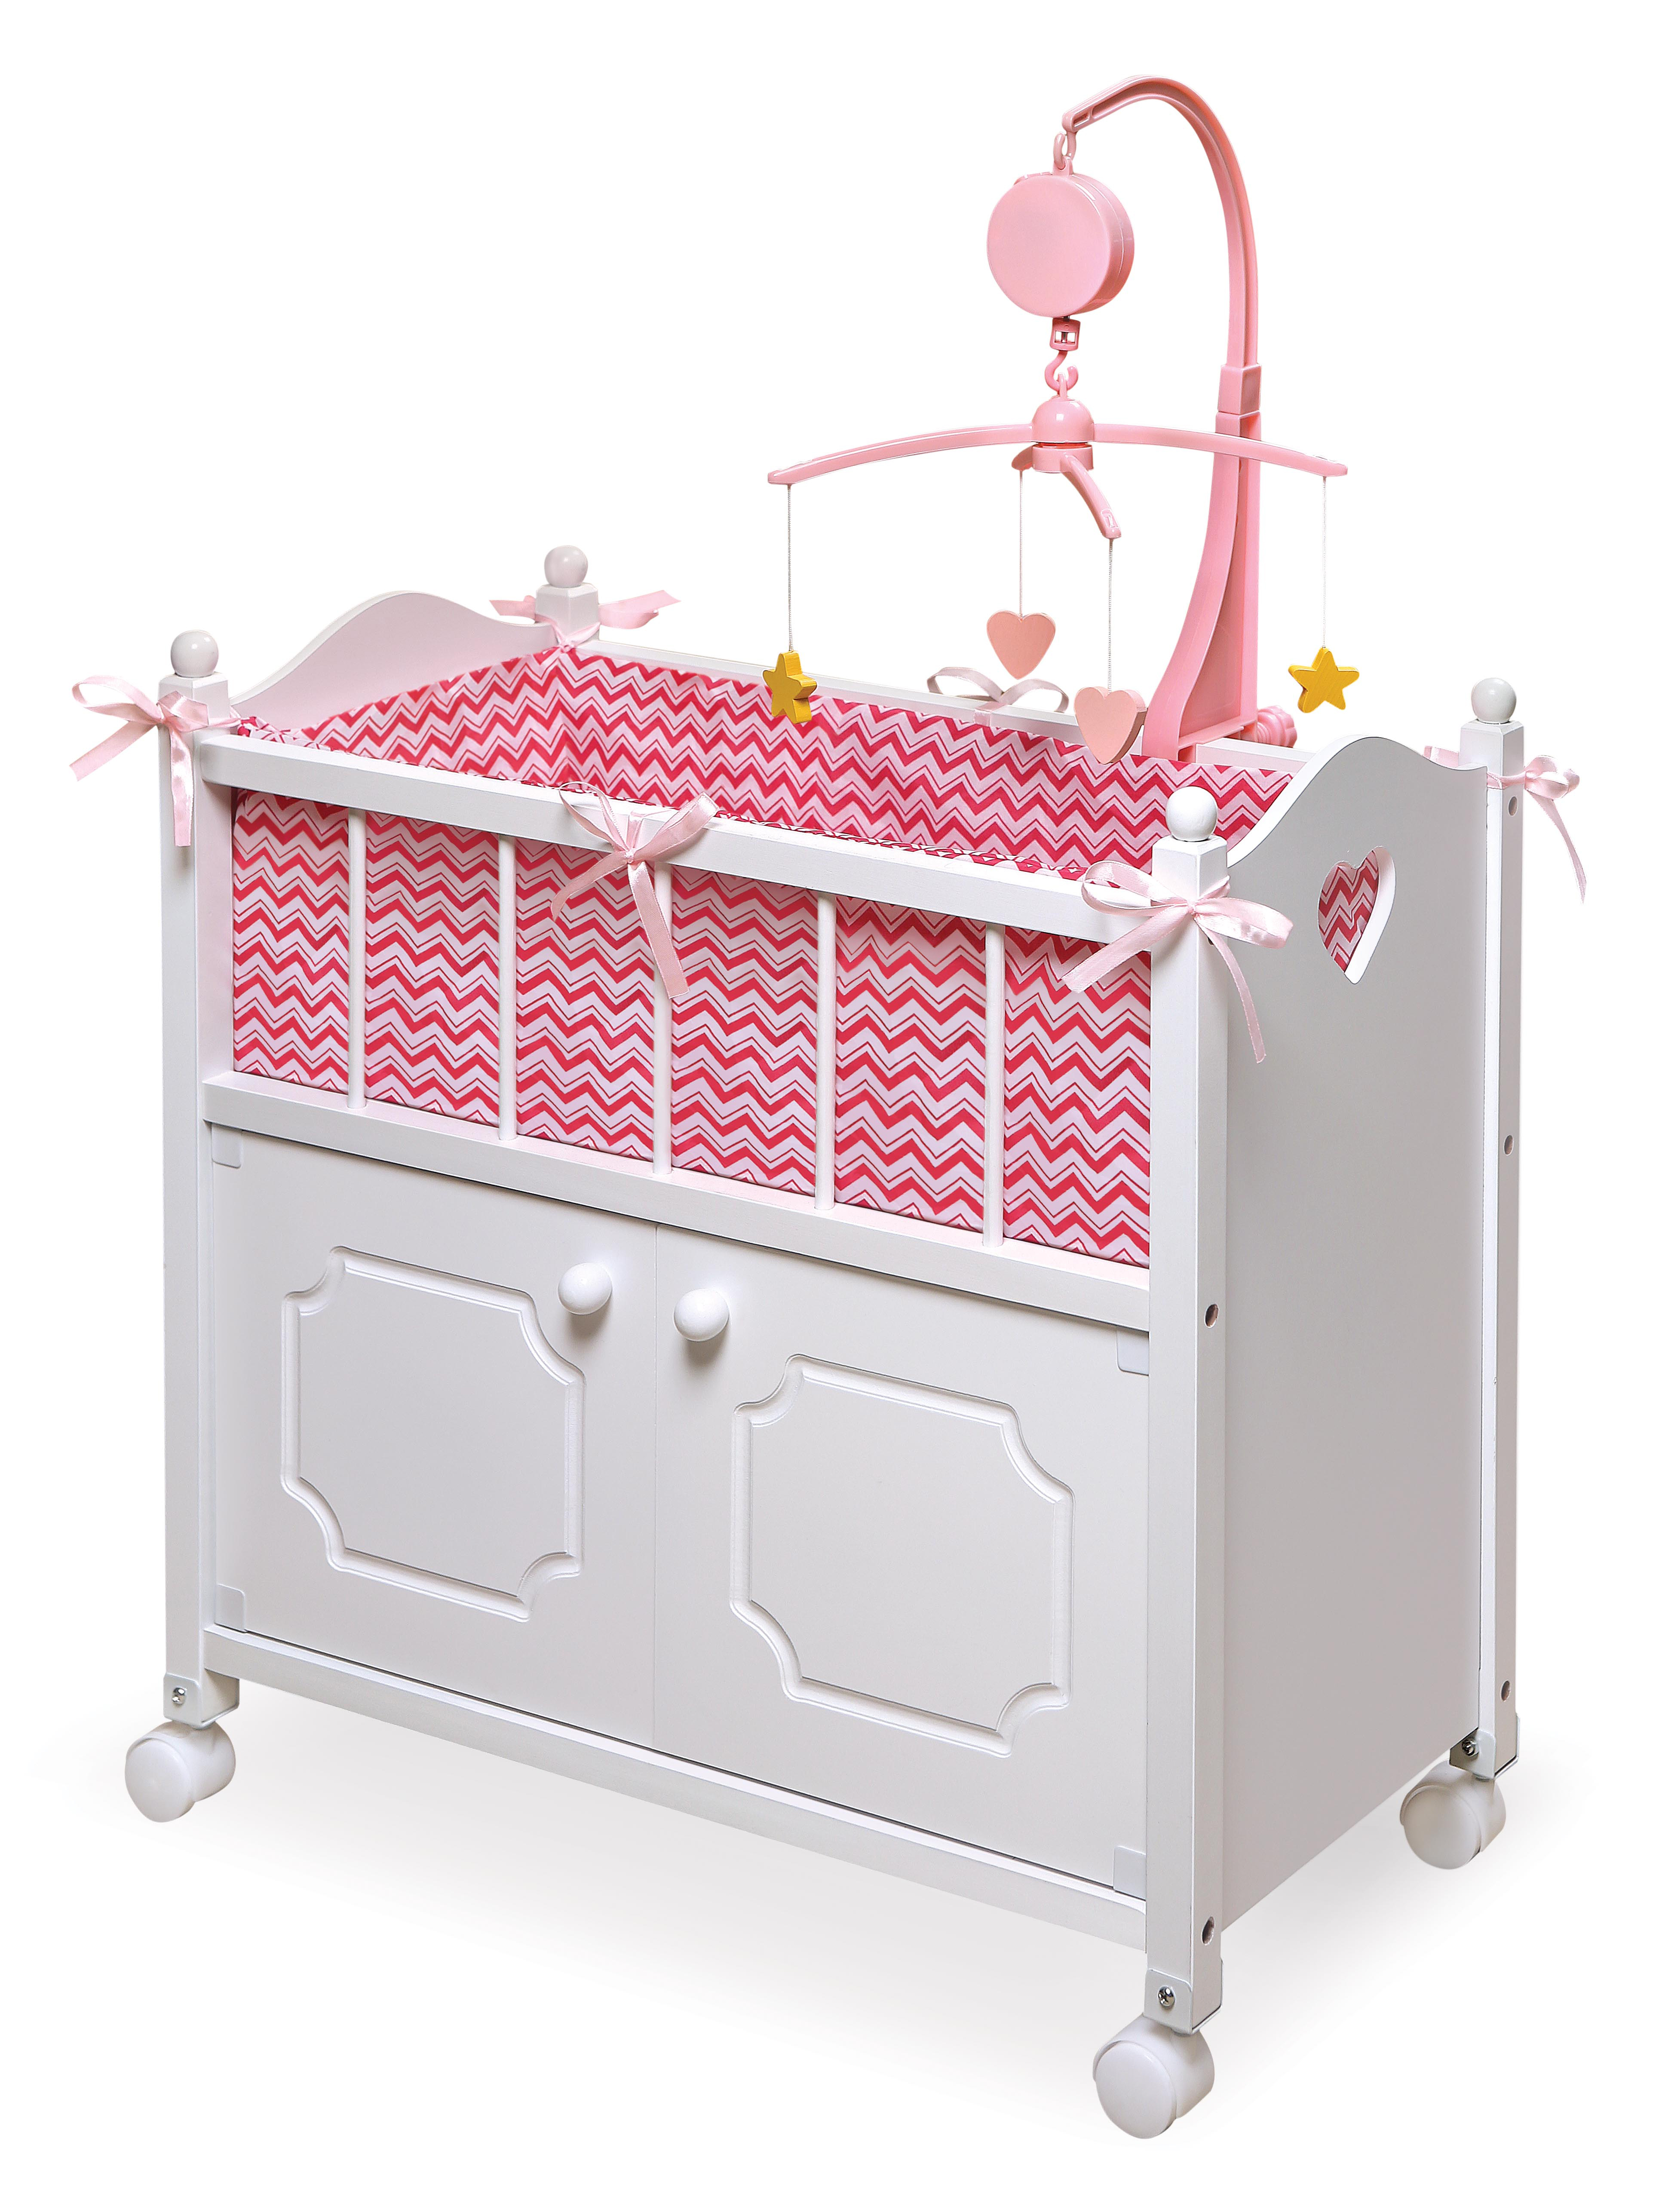 Cabinet Doll Crib with Chevron Bedding and Free Personalization Kit - White/Pink